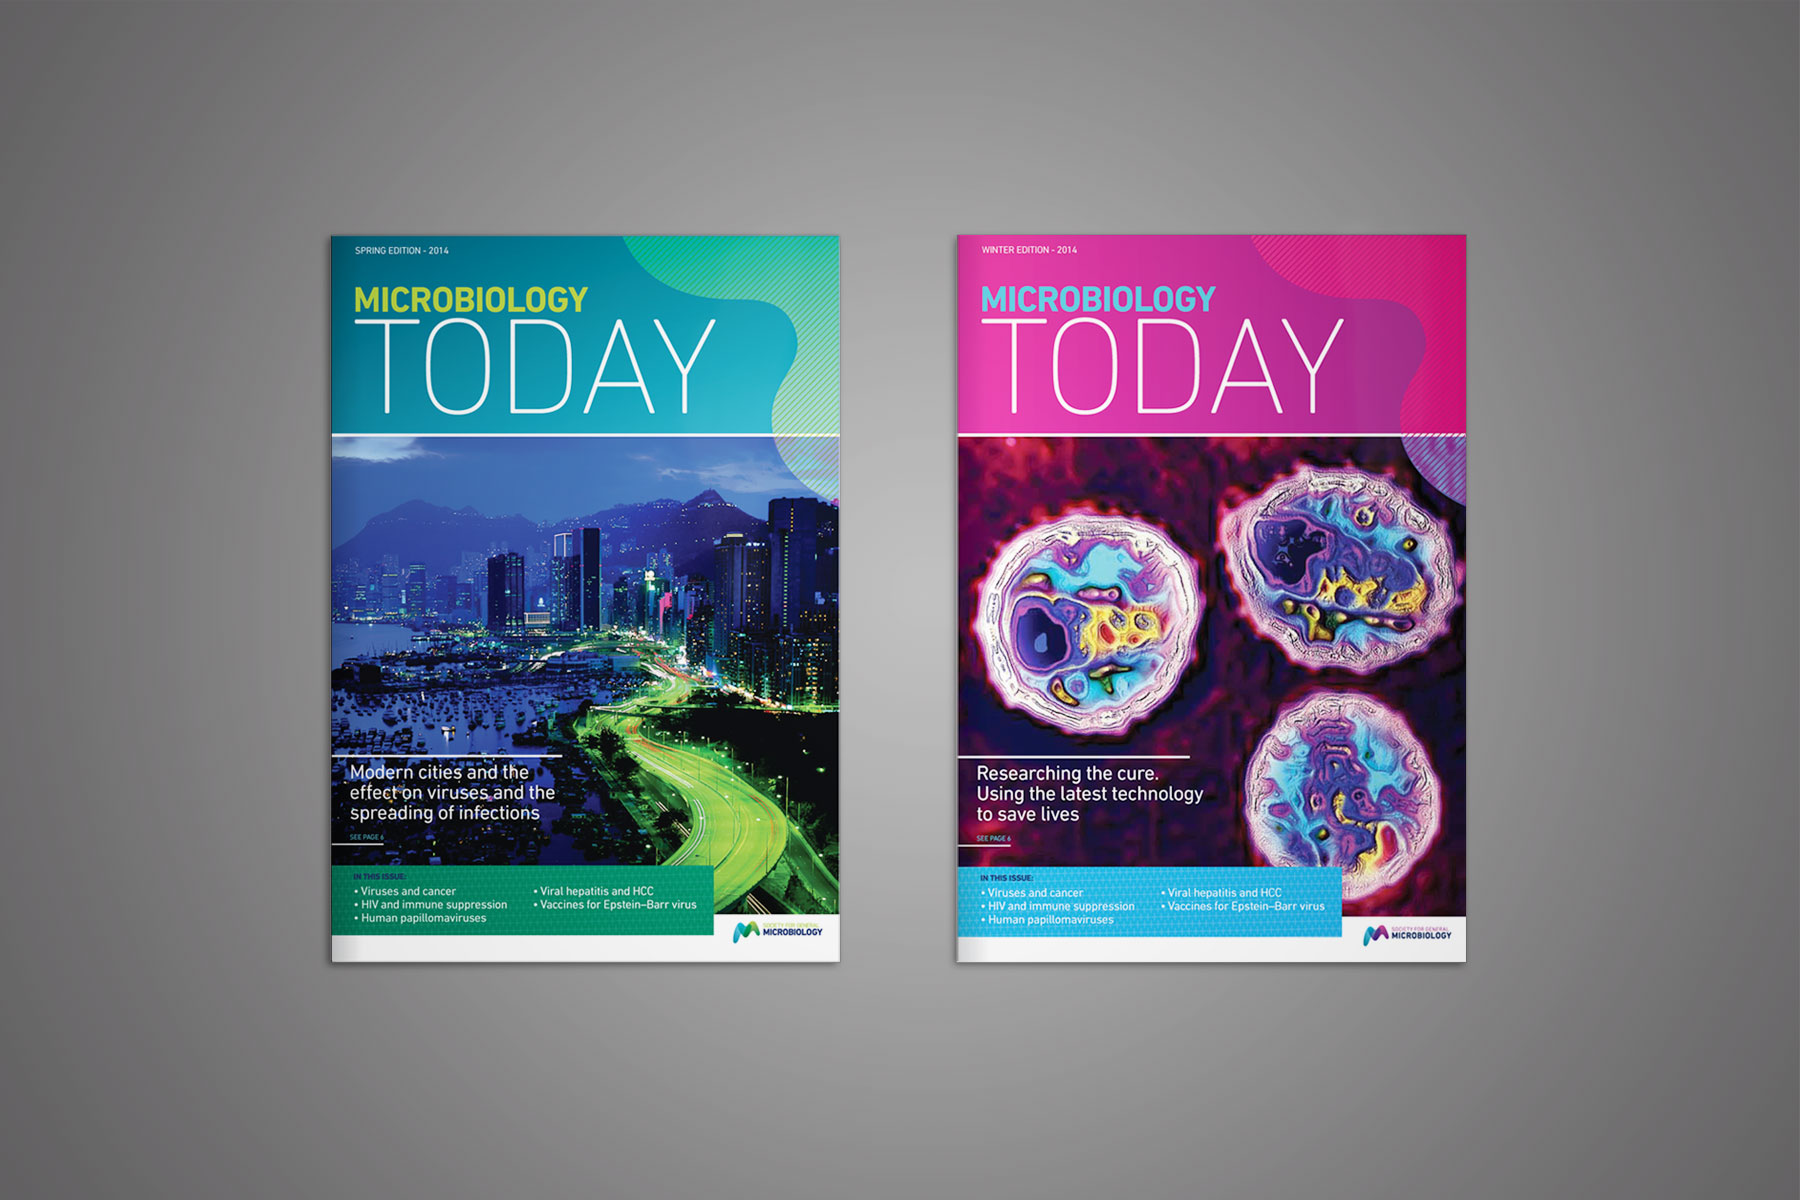 A redesign of Microbiology today - an industry circulated magazine.